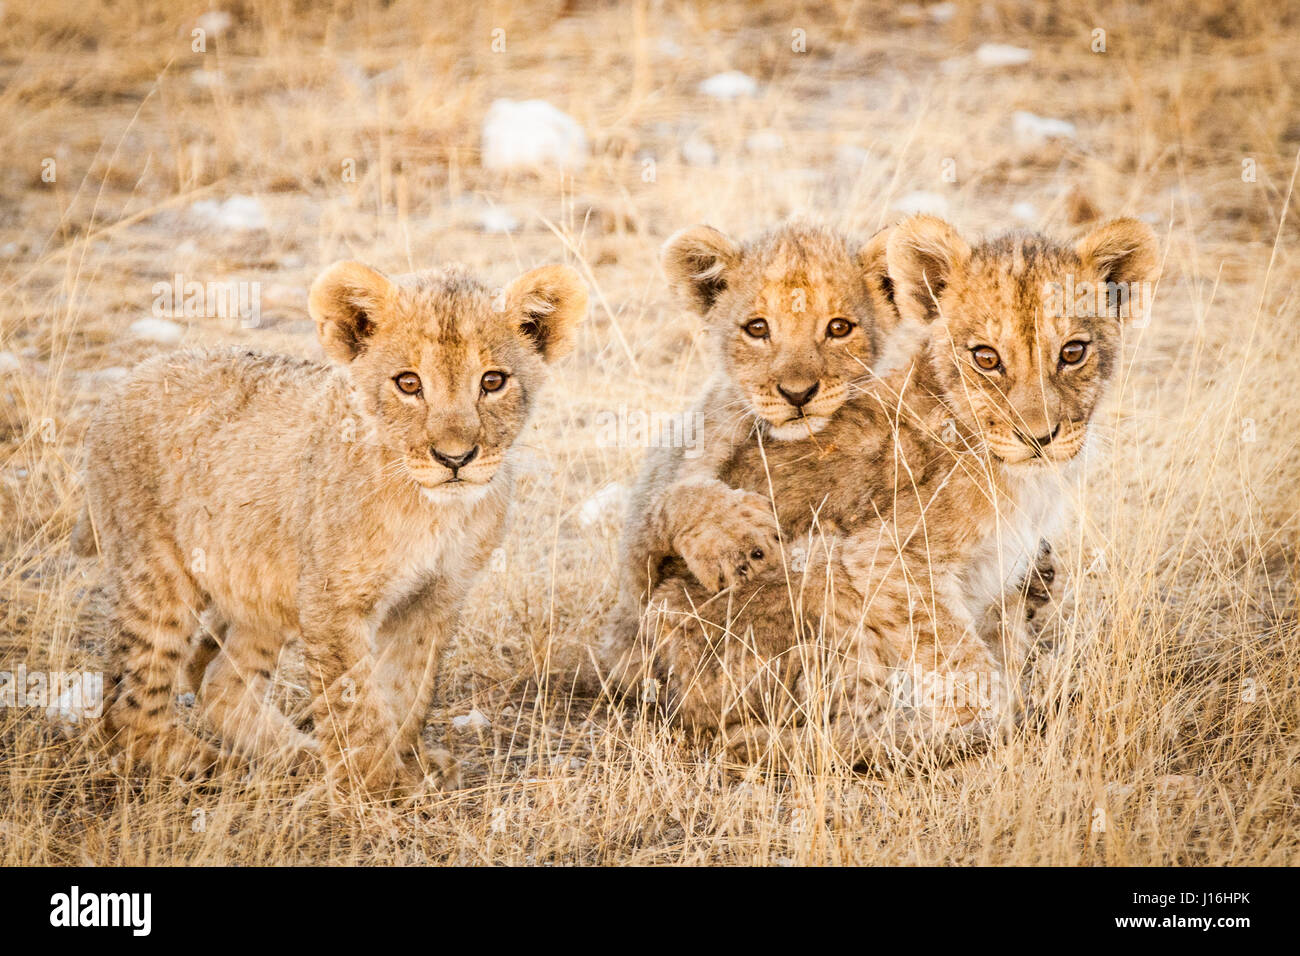 Three lion cubs being curious in Etosha National Park, Namibia Stock Photo